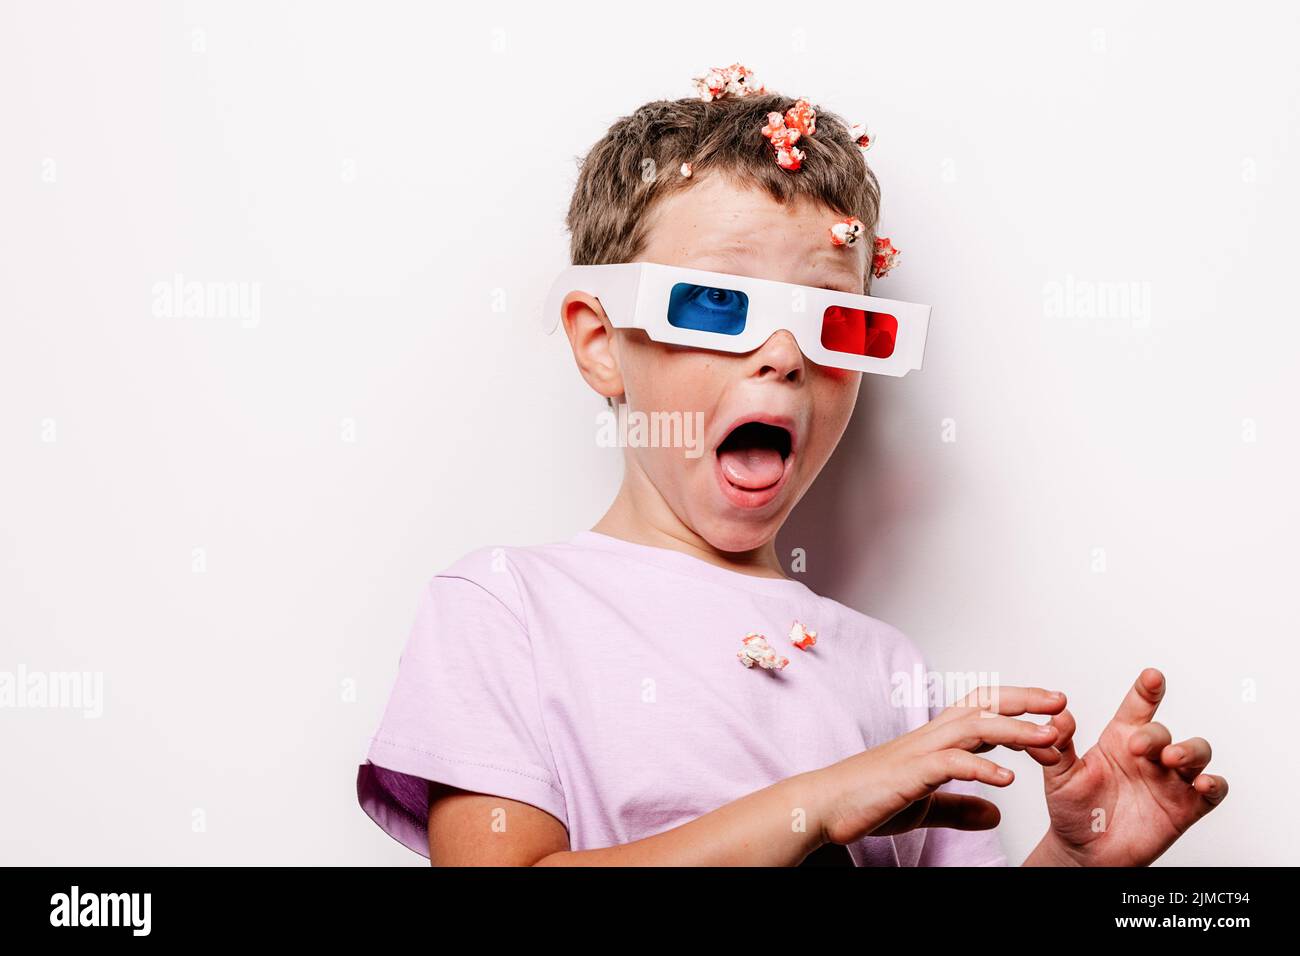 Child in 3D glasses with colorful lenses throwing tasty popcorn with opened mouth while standing against white background in light studio Stock Photo